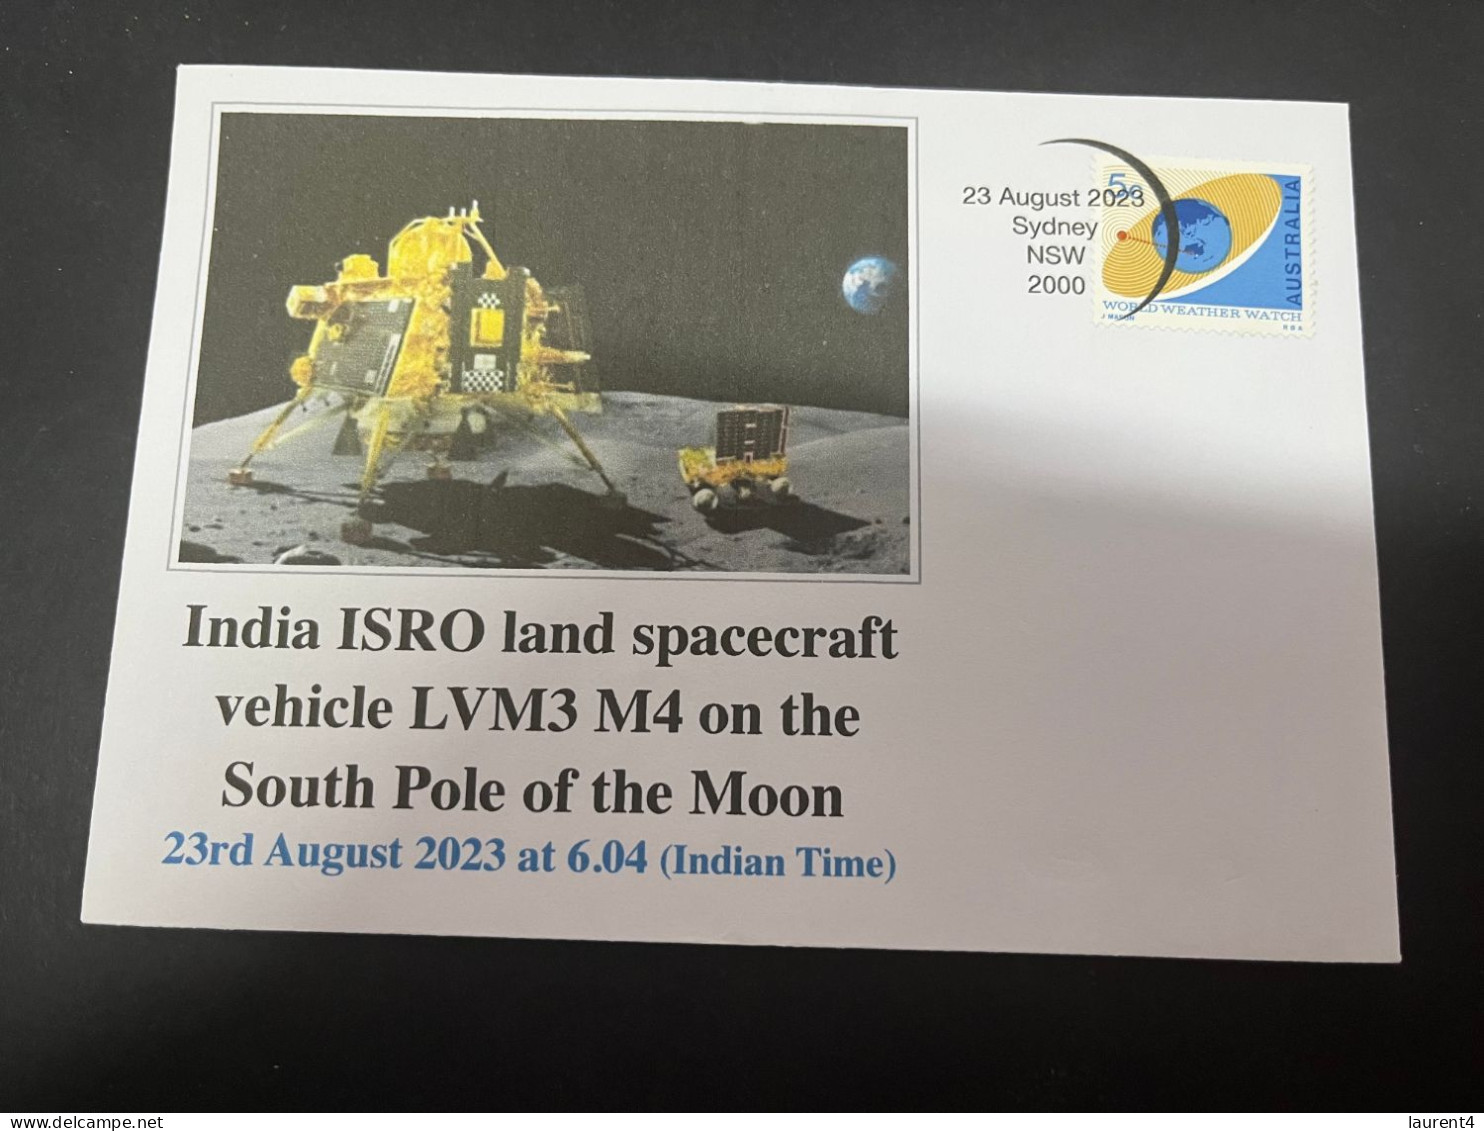 4-5-2024 (4 Z 7) Chandrayann-3 (India Space Agency) Launched & Land On Moon (2 Covers) - Other & Unclassified